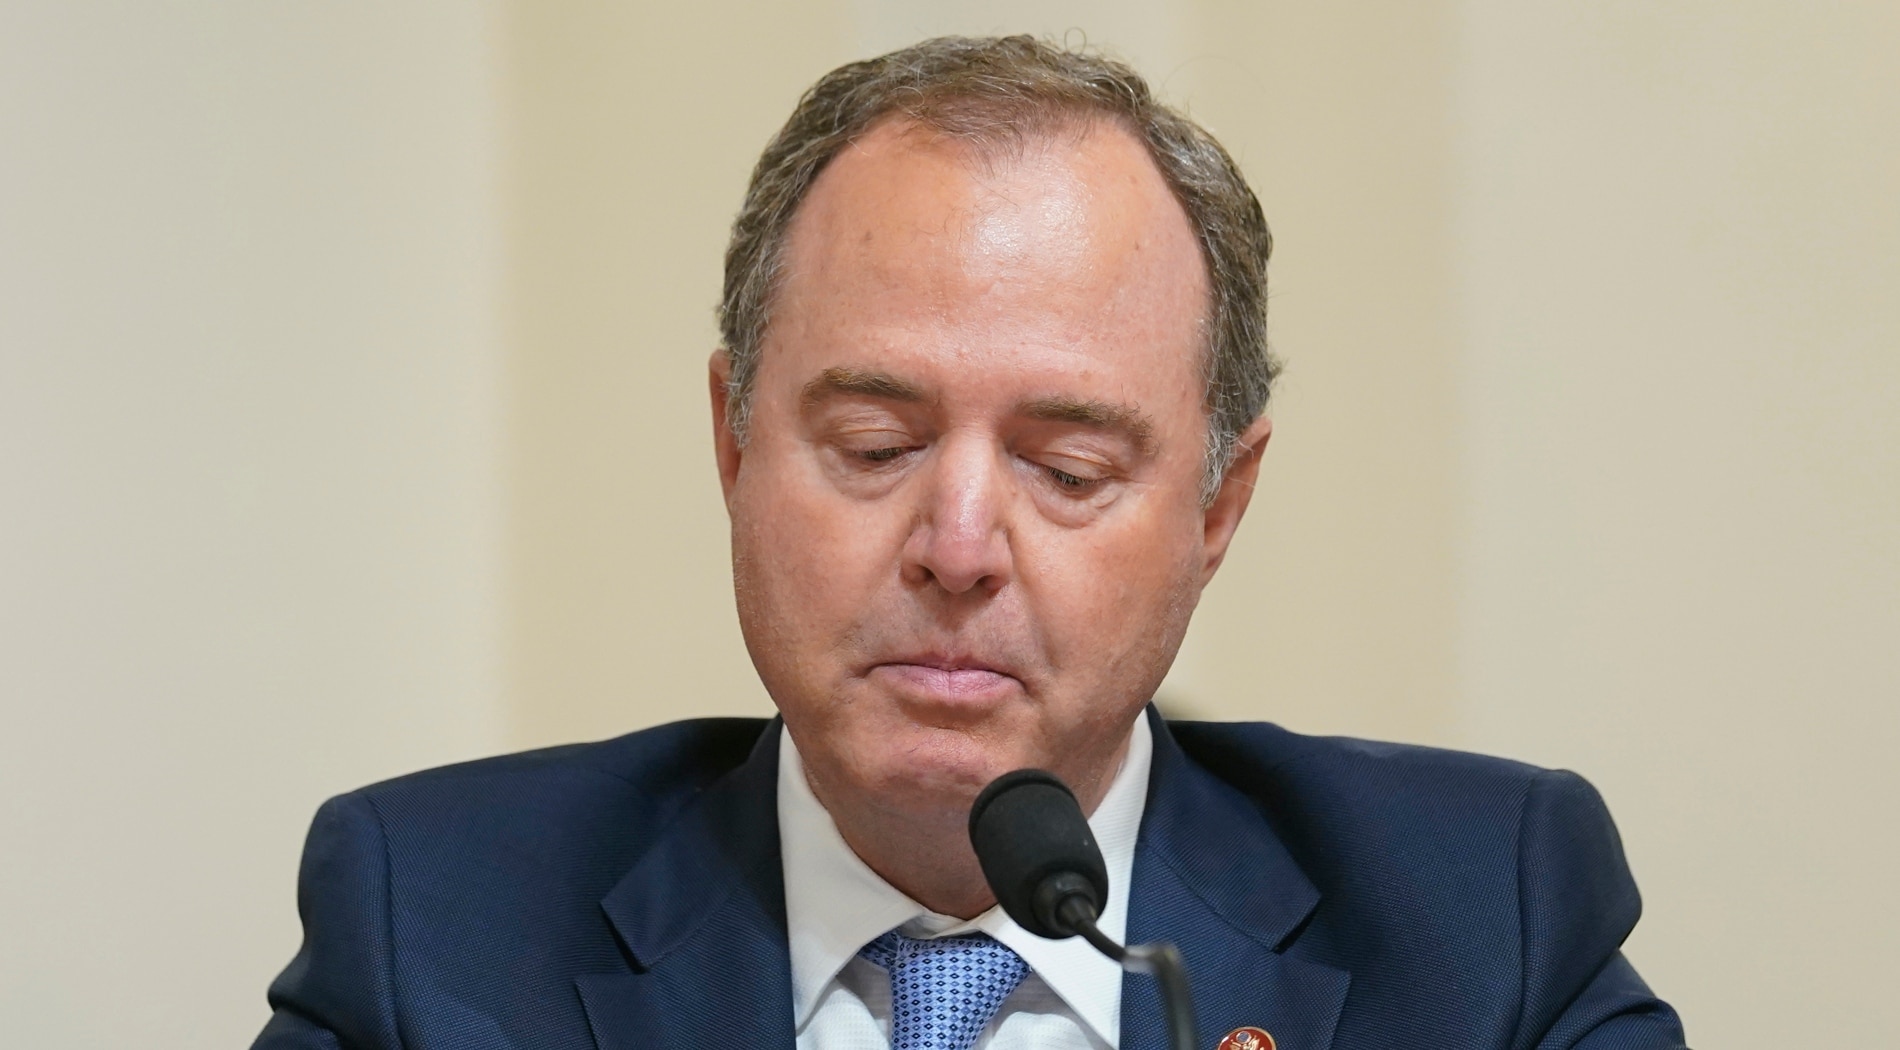 Schiff Nailed With Ethics Probe After Declaring Senate Bid